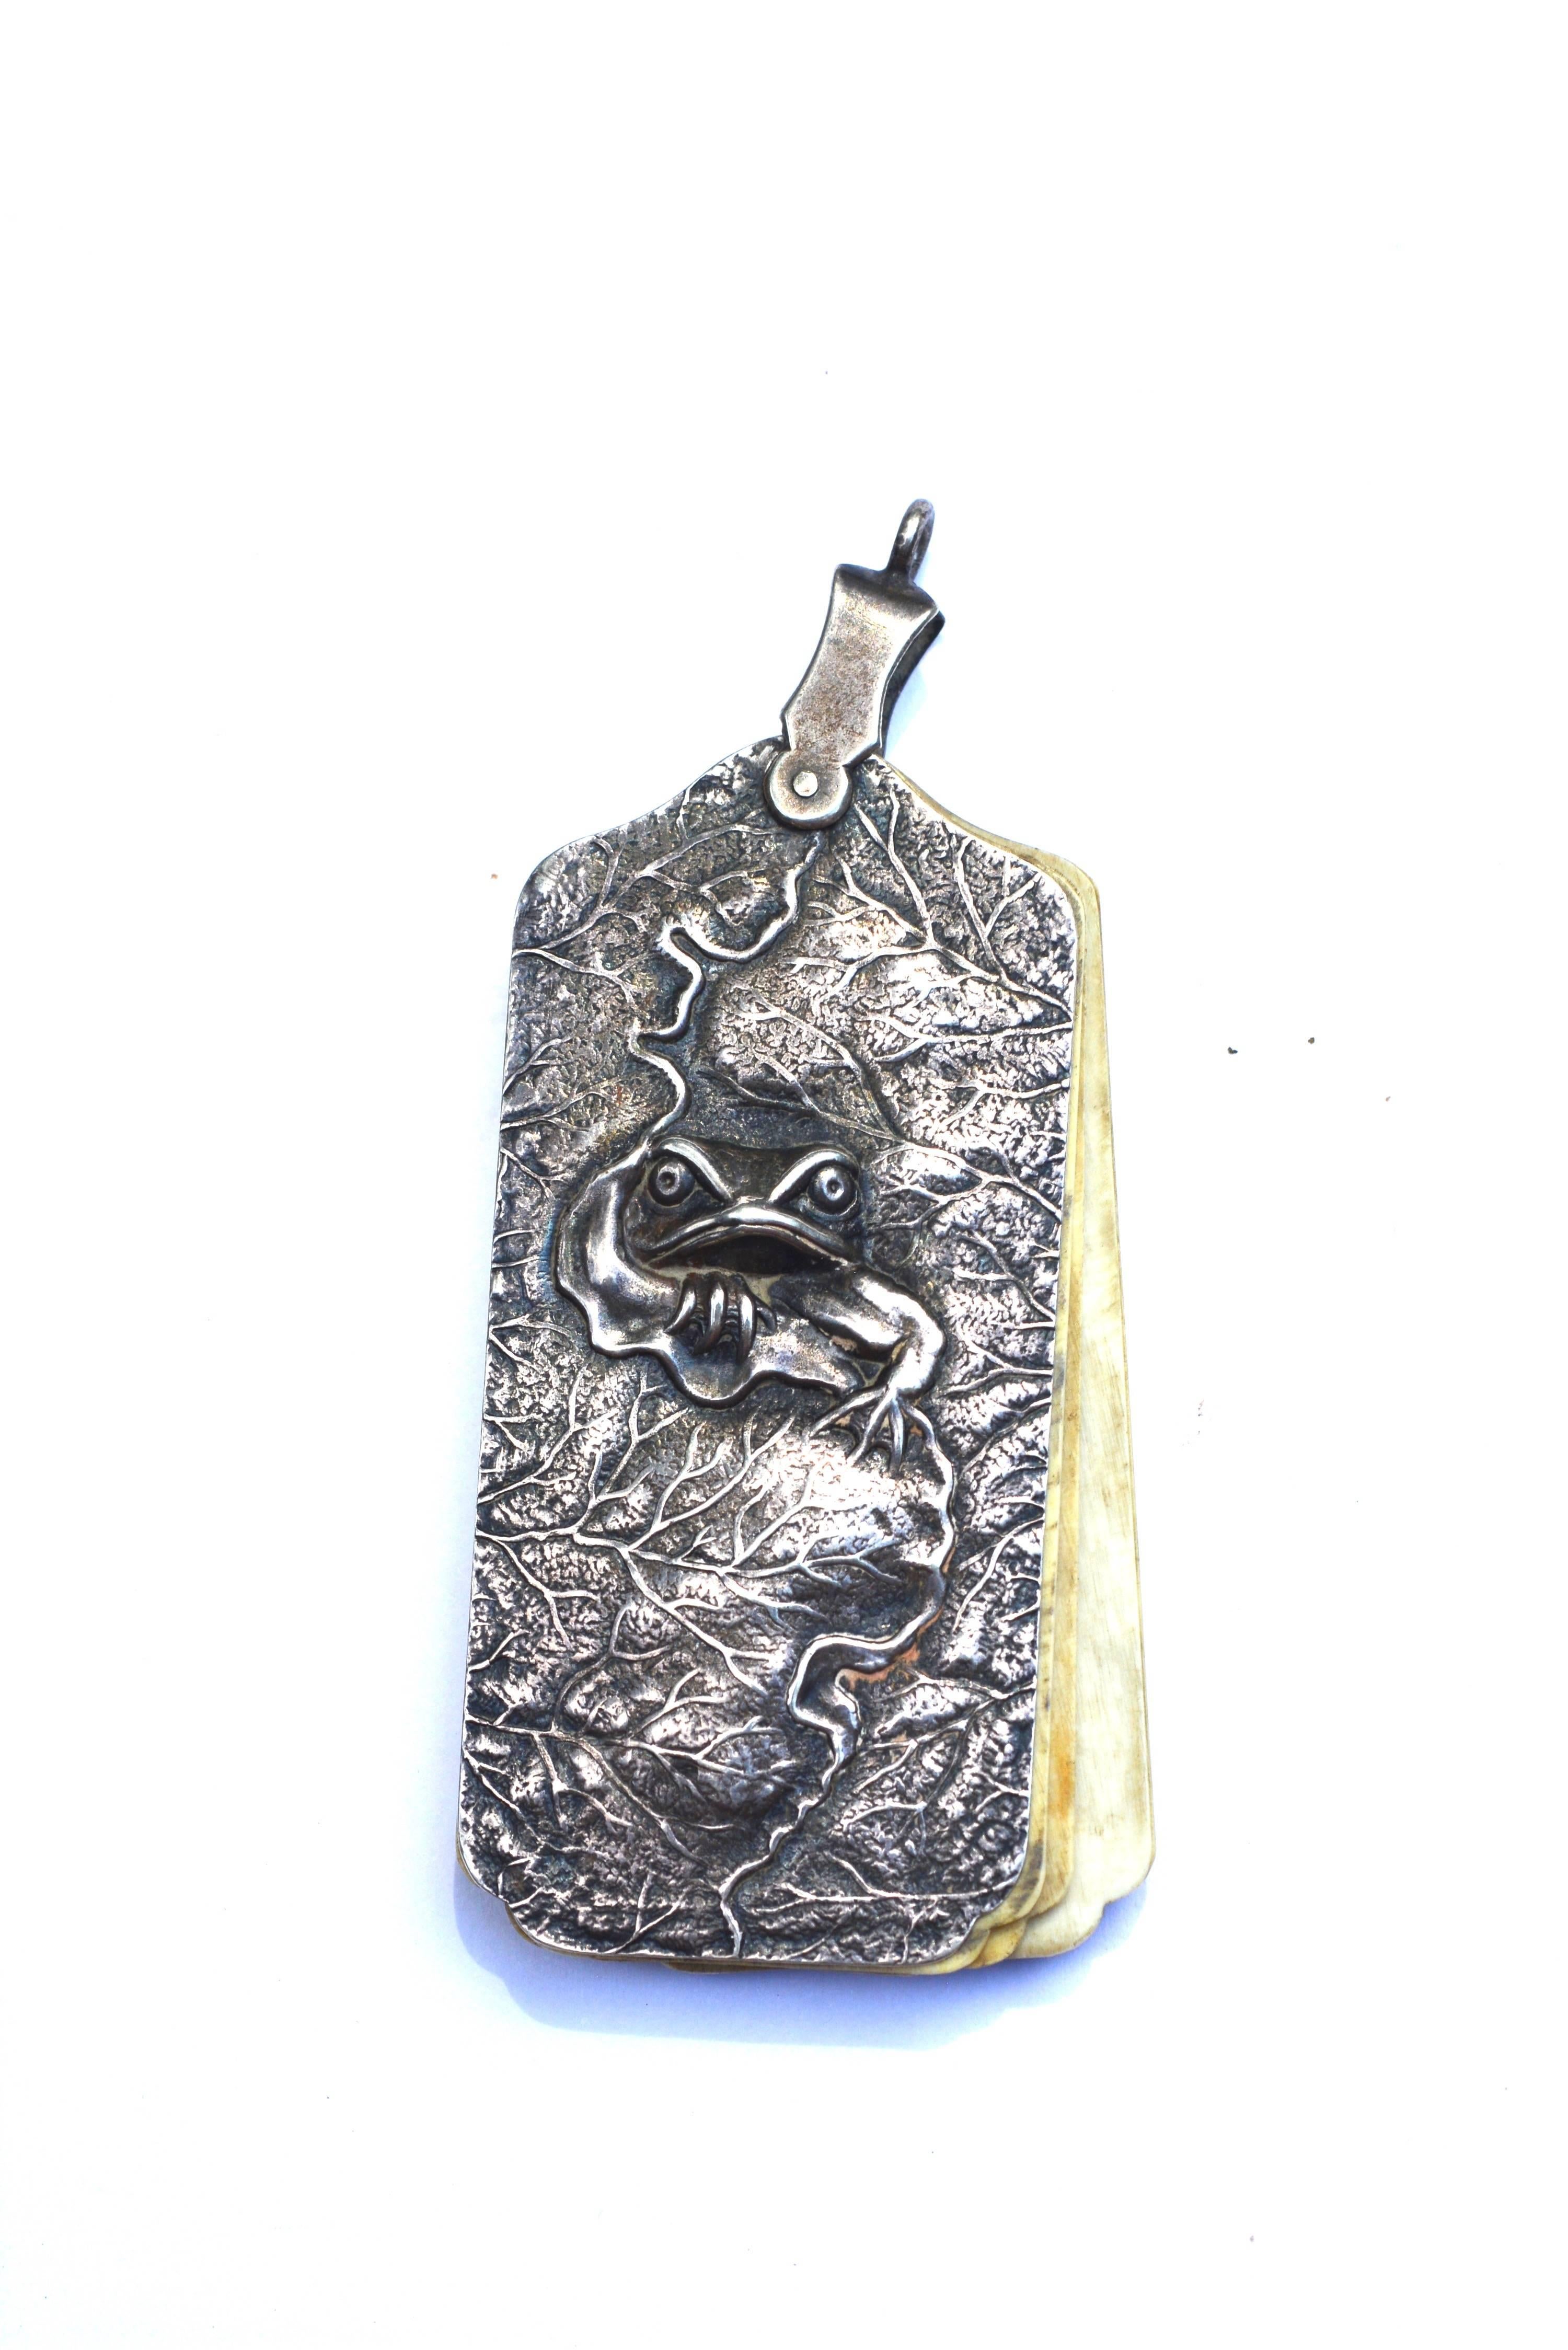 Sterling Silver Chatelaine notepad with a whimsical frog and lily pad design. Can be mounted on a chain as shown here. Celluloid pages marked with the days of the week. Chain not included.  Late 1800s-Early 1900s. Marked sterling with an S inside